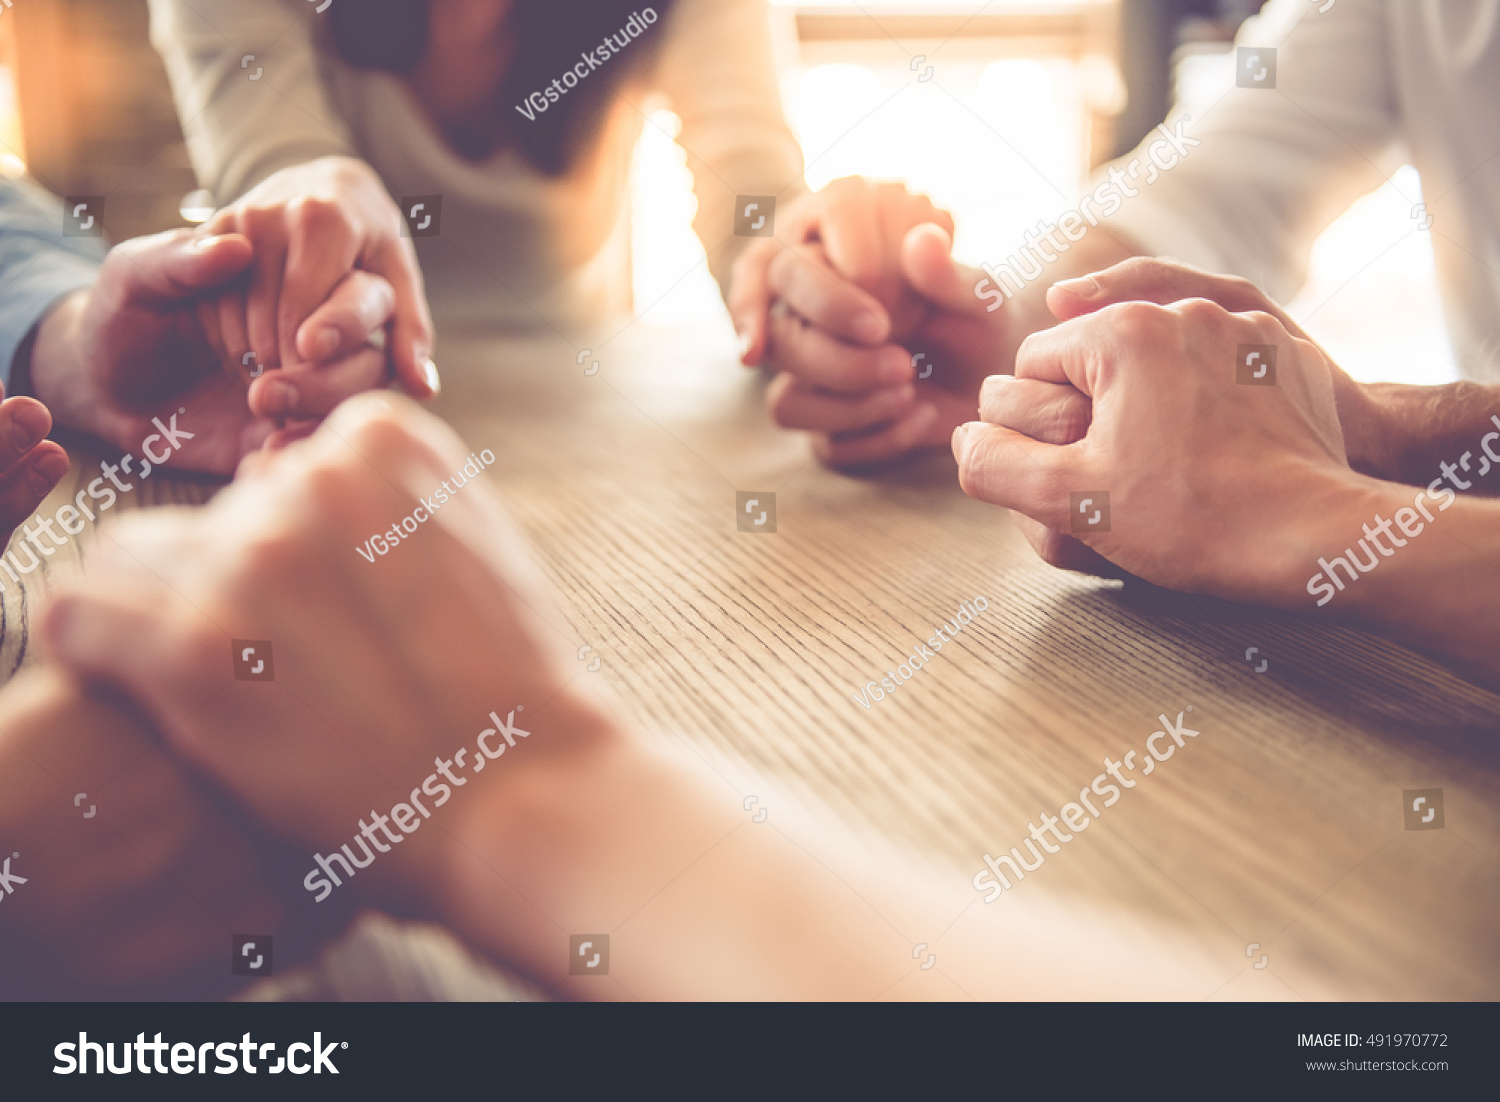 stock-photo-cropped-image-of-beautiful-business-team-holding-hands-and-praying-while-sitting-in-office-491970772.jpg